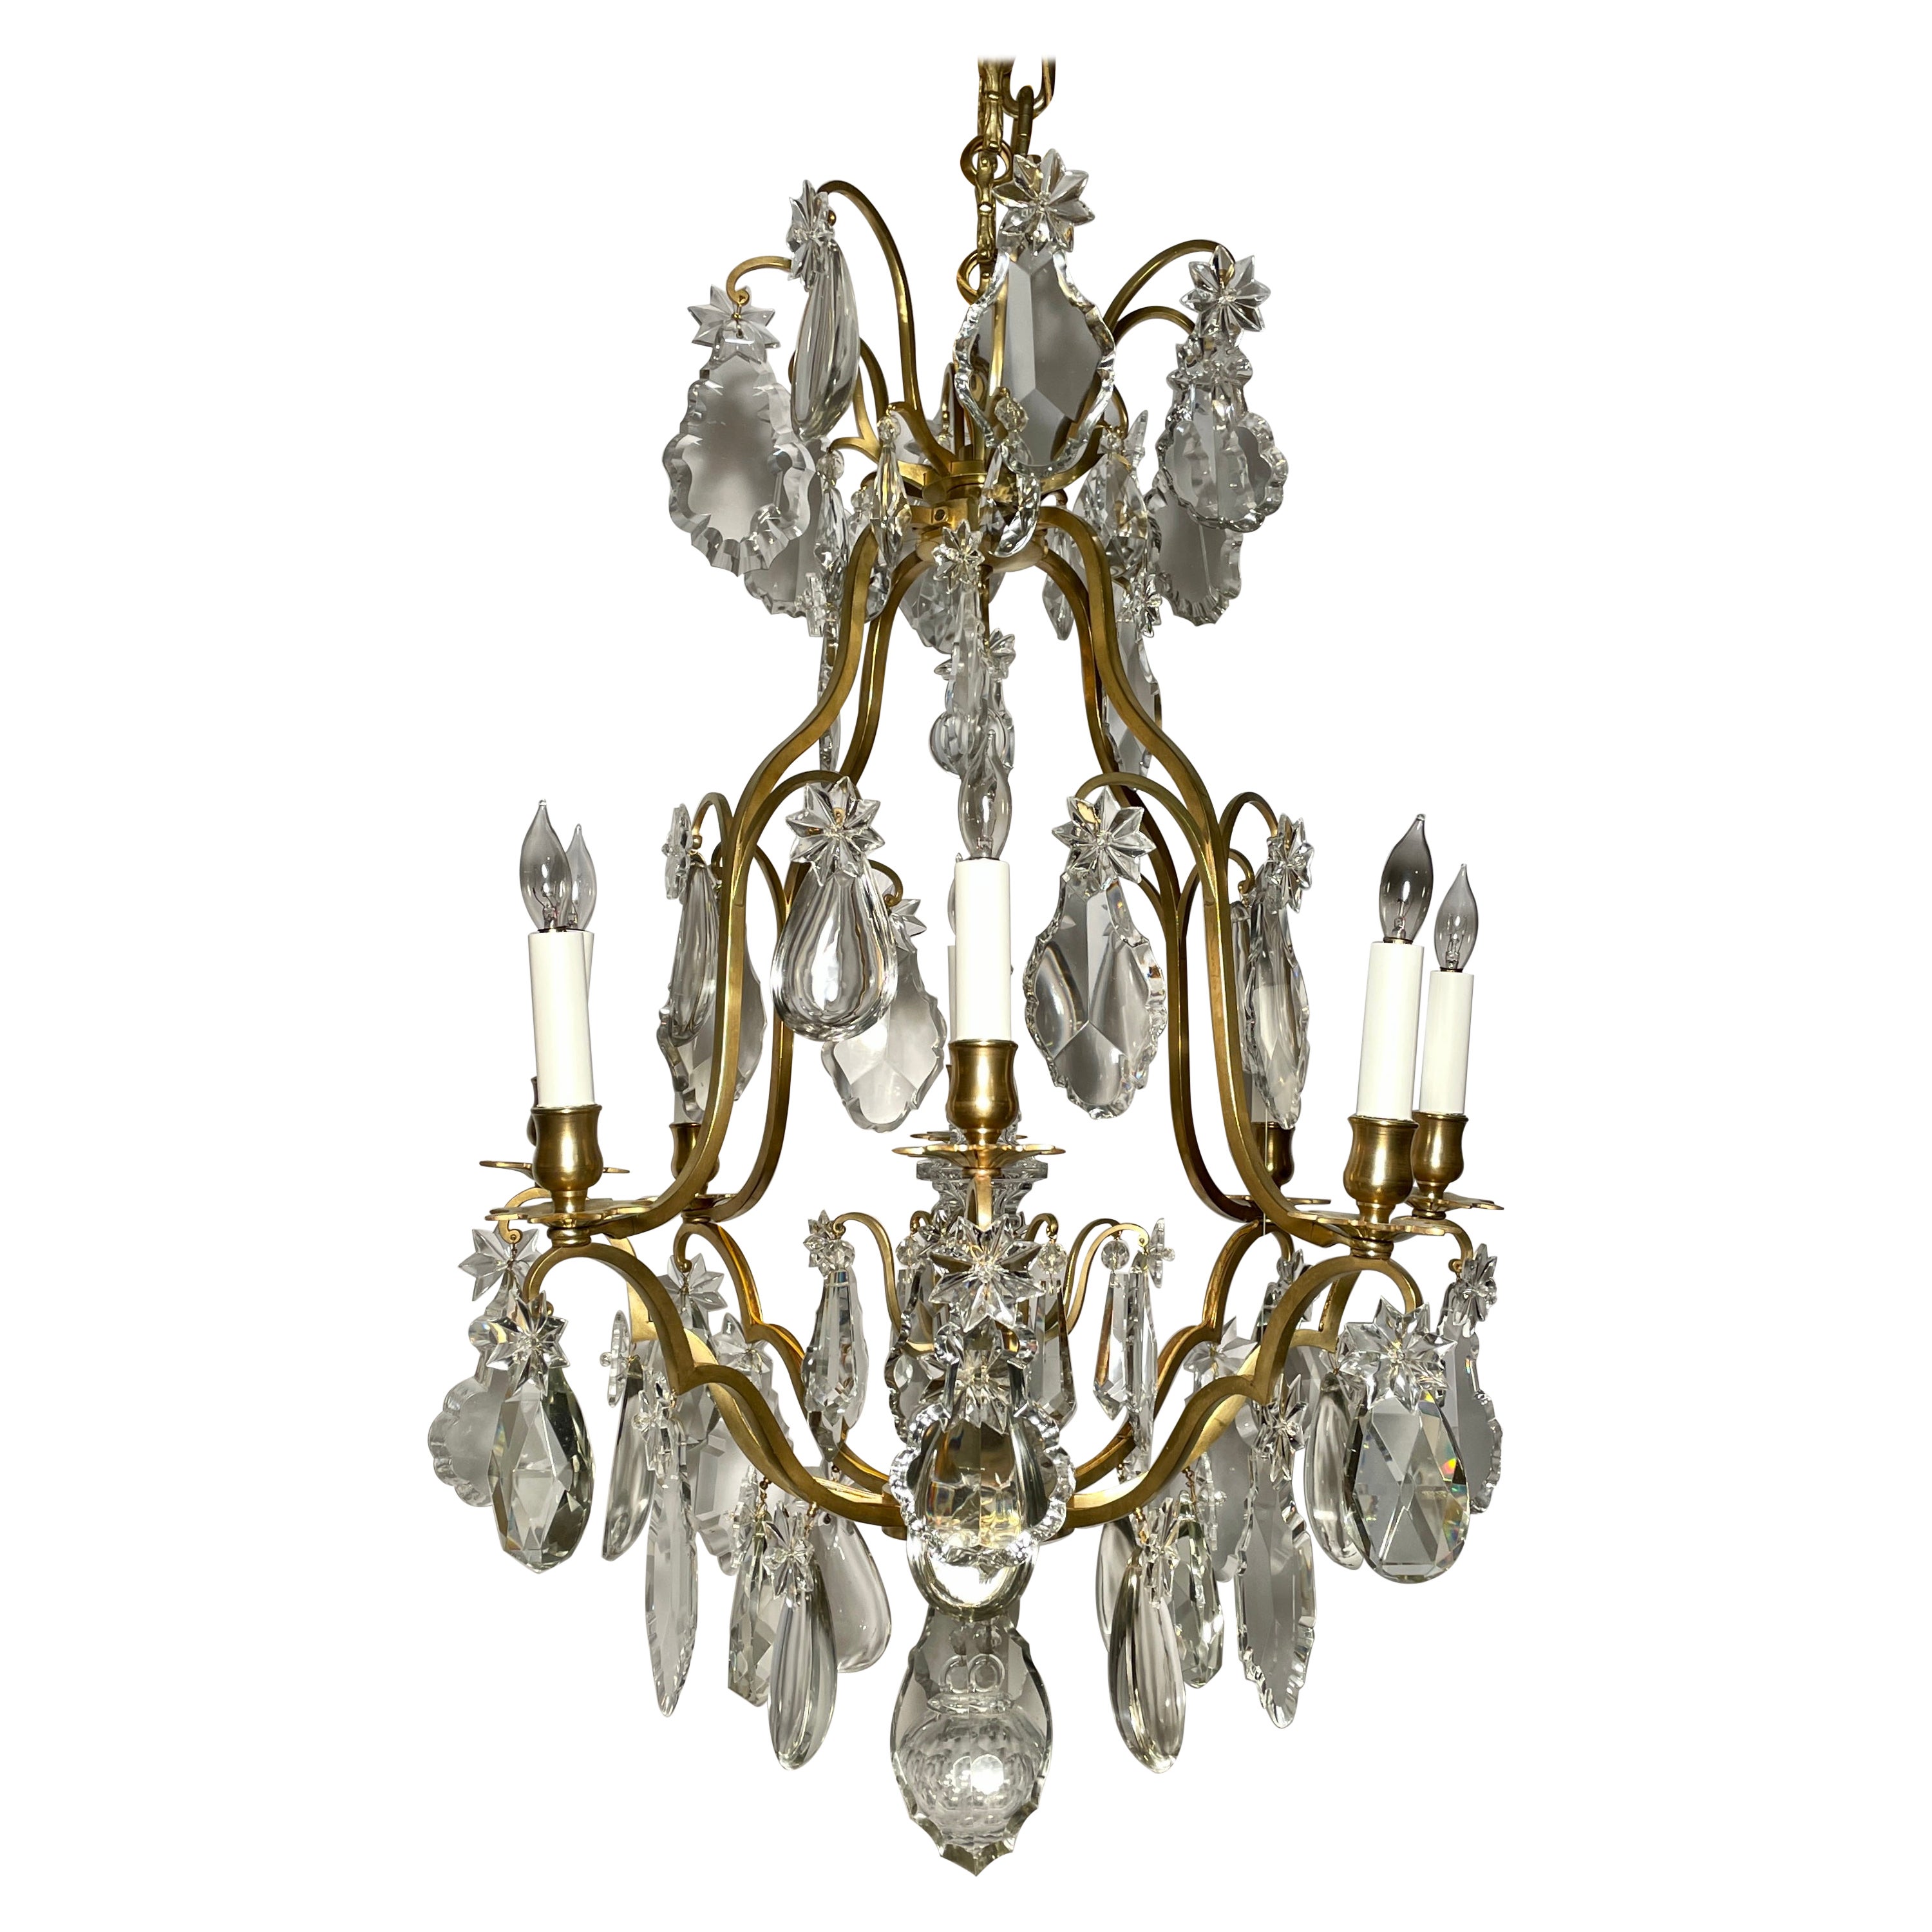 Antique French Baccarat Crystal and Gold Bronze 8 Light Chandelier, circa 1890